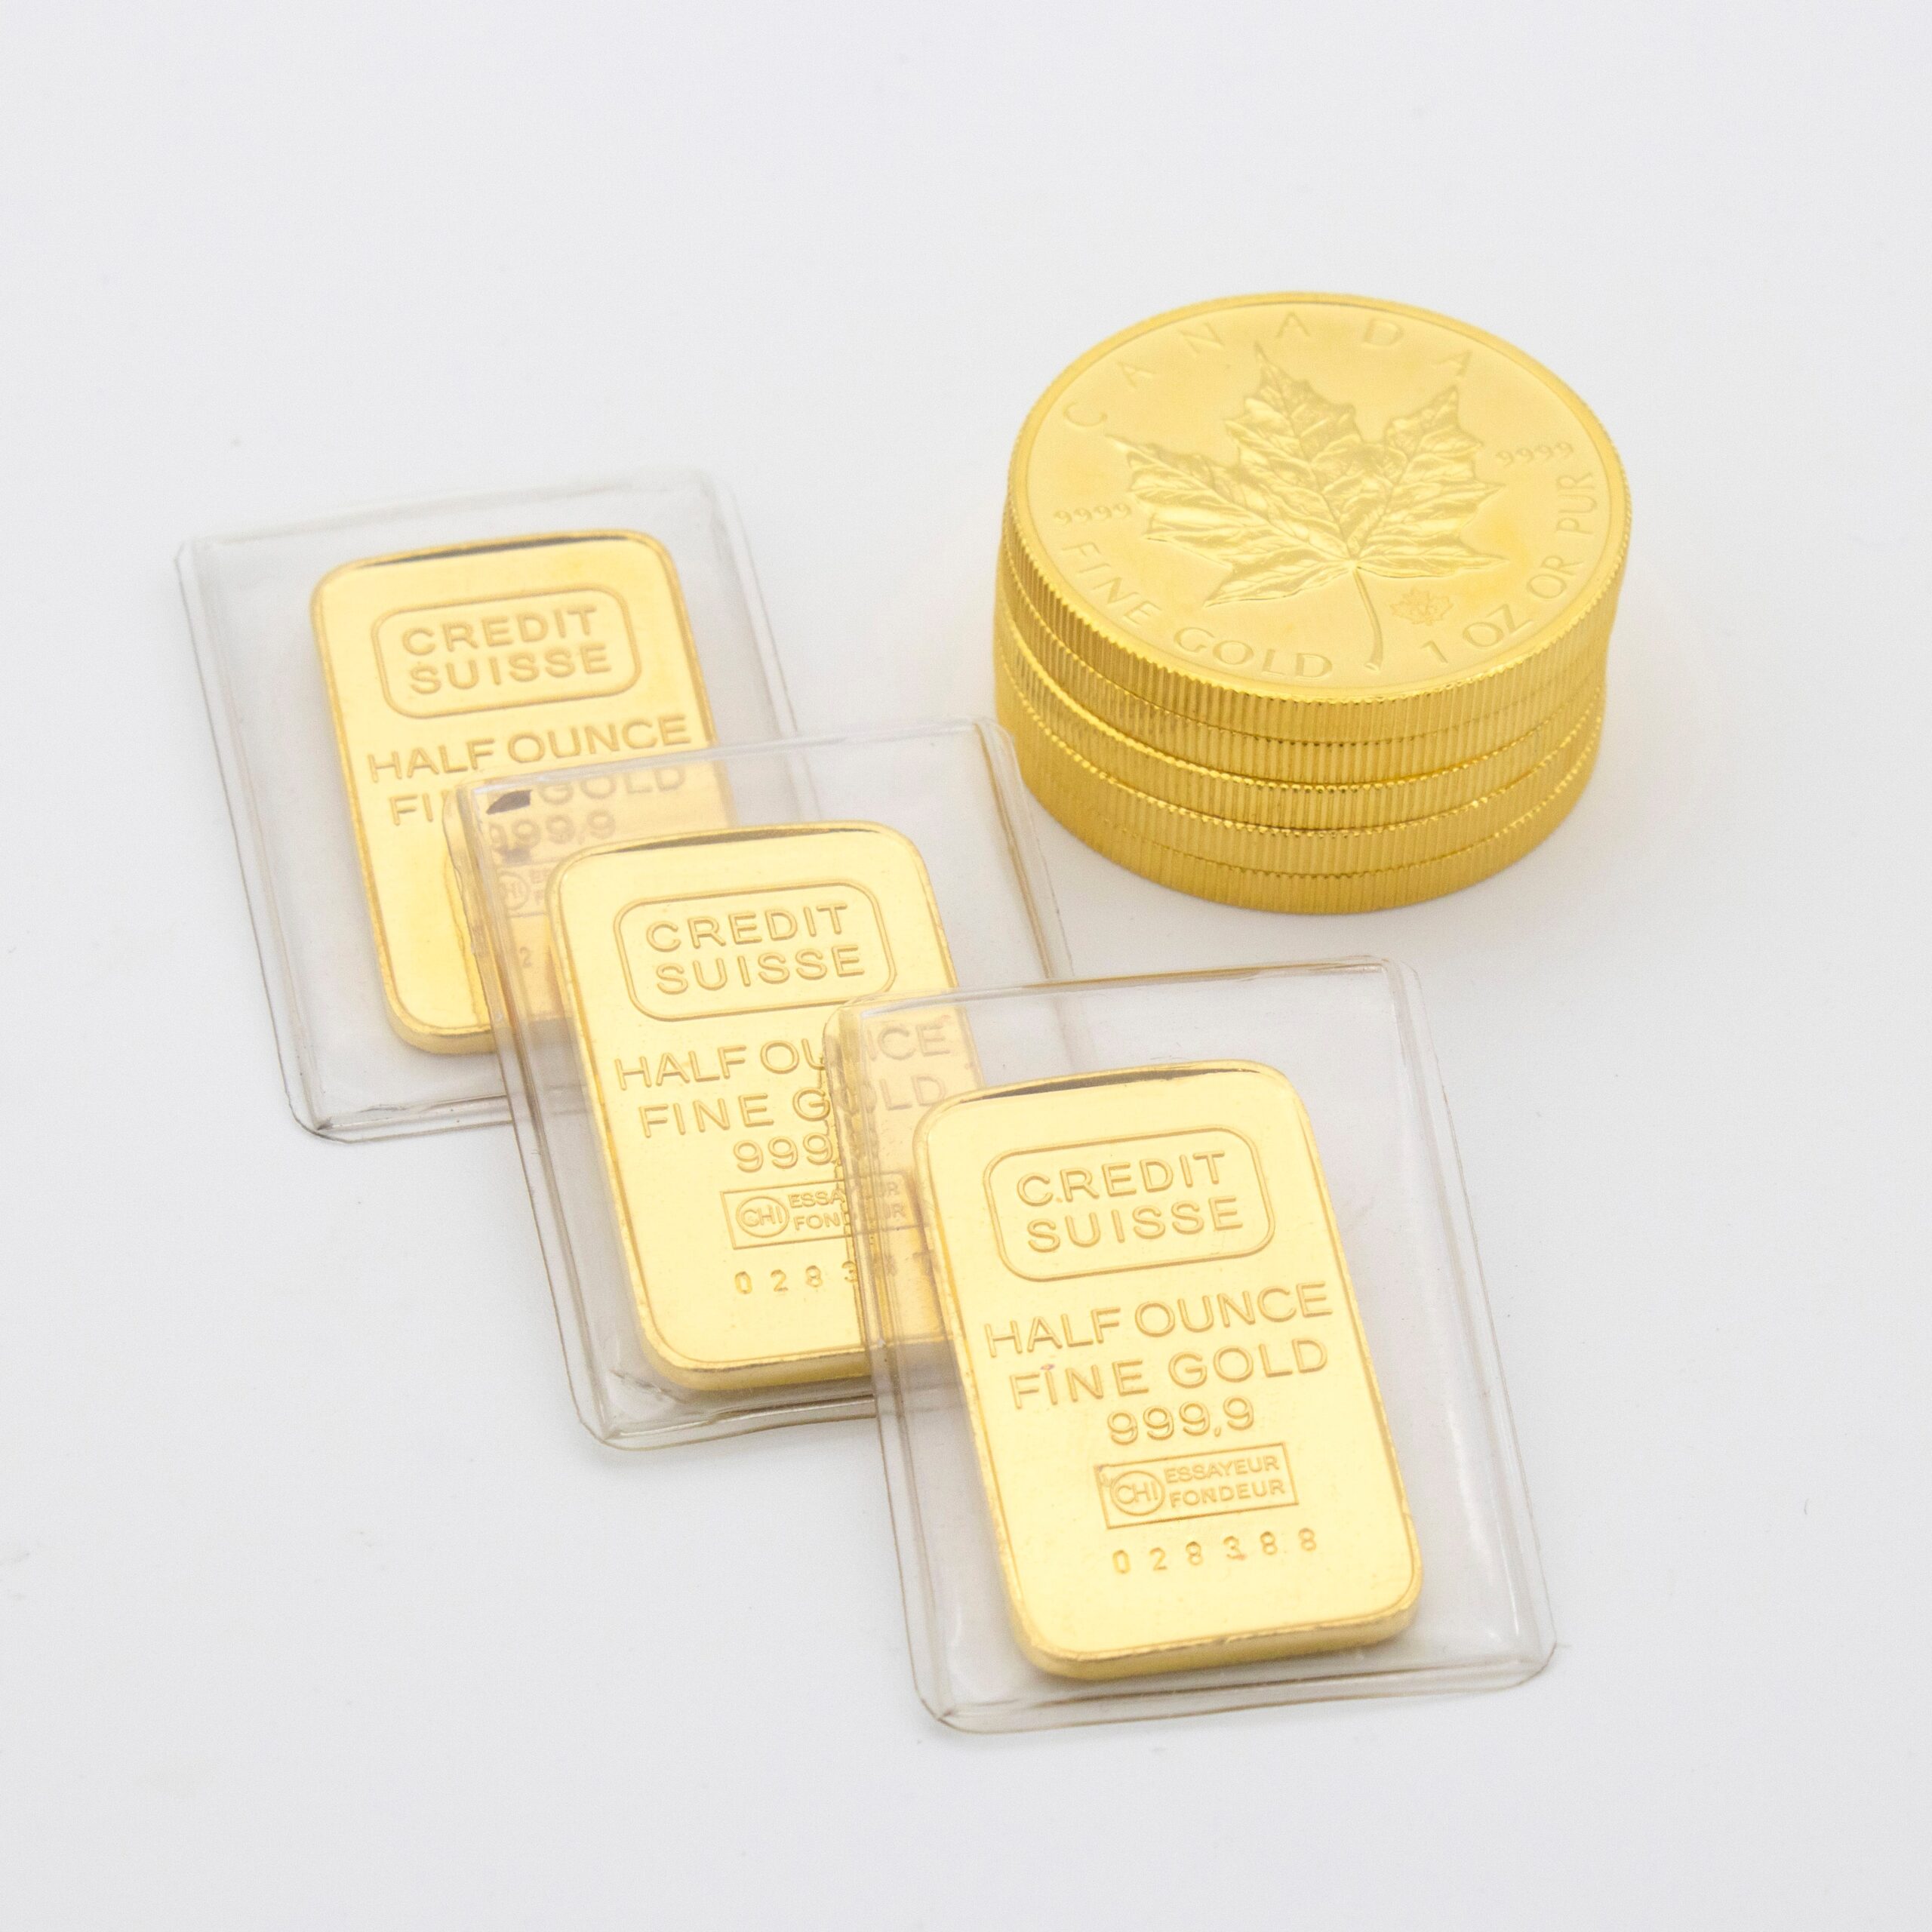 Gold Bars & Coins